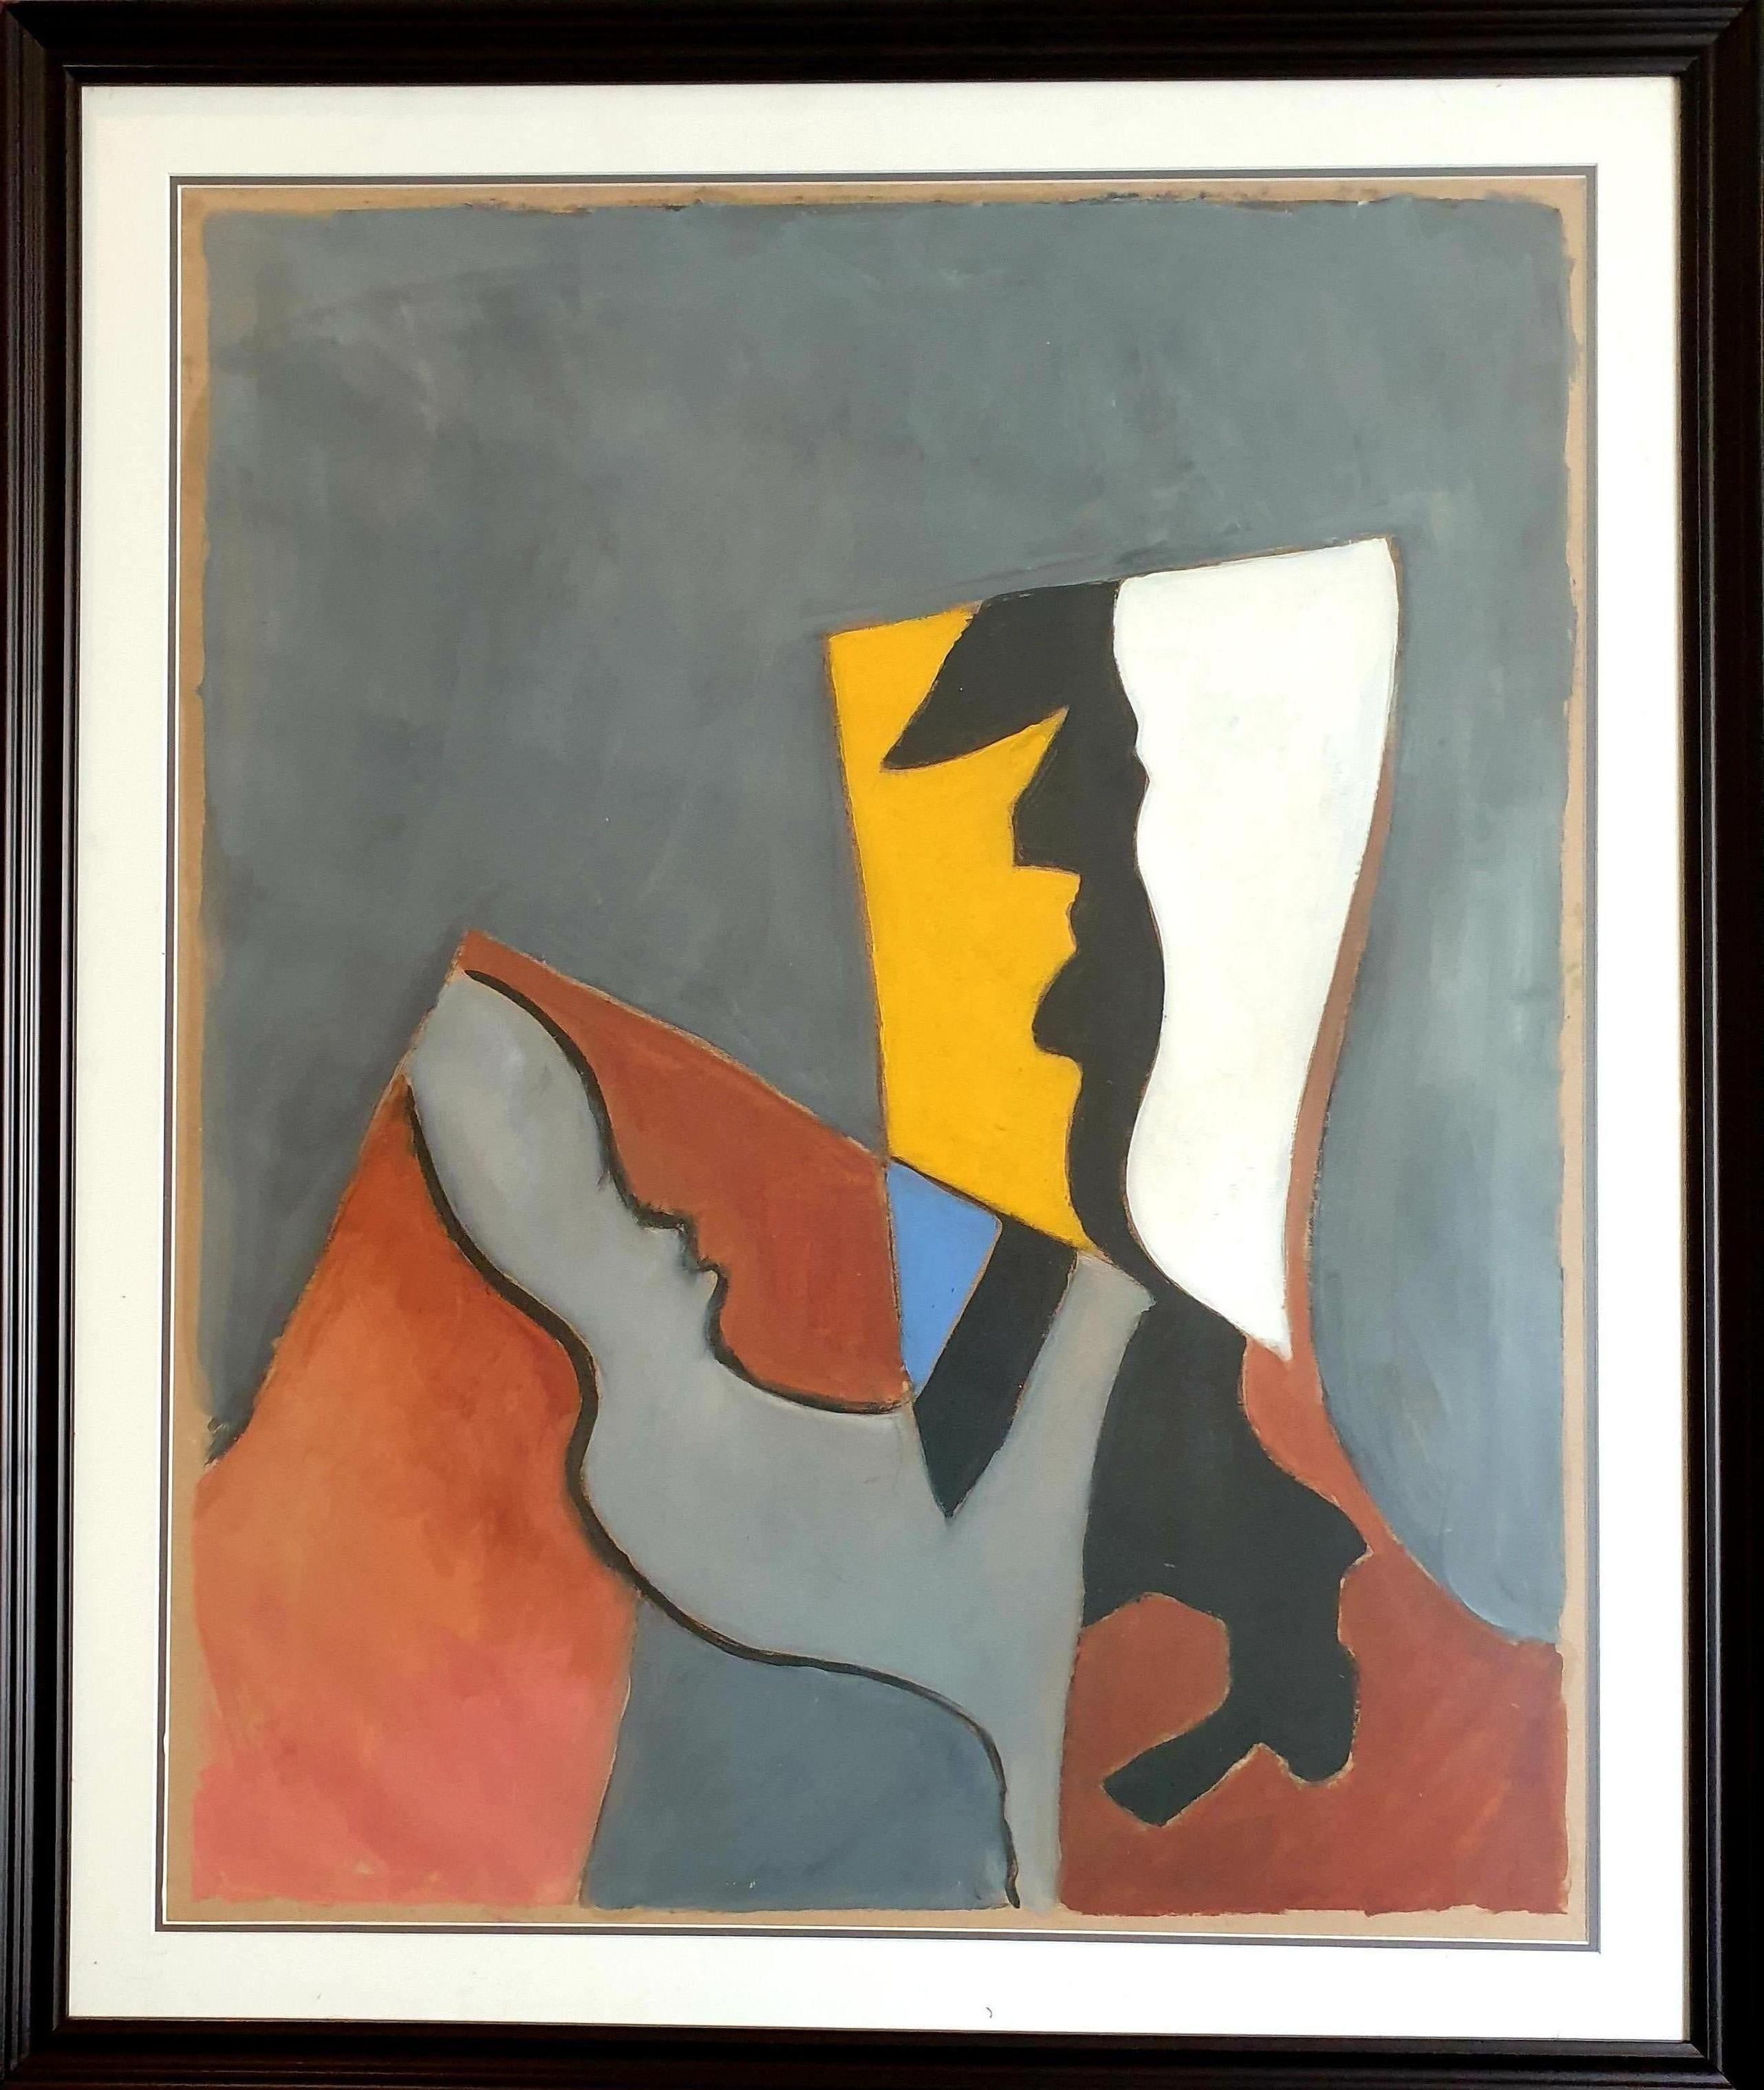 Serge Poliakoff Abstract Painting - Hommage a Poliakoff, Tachiste Abstract Acrylic on Paper. 